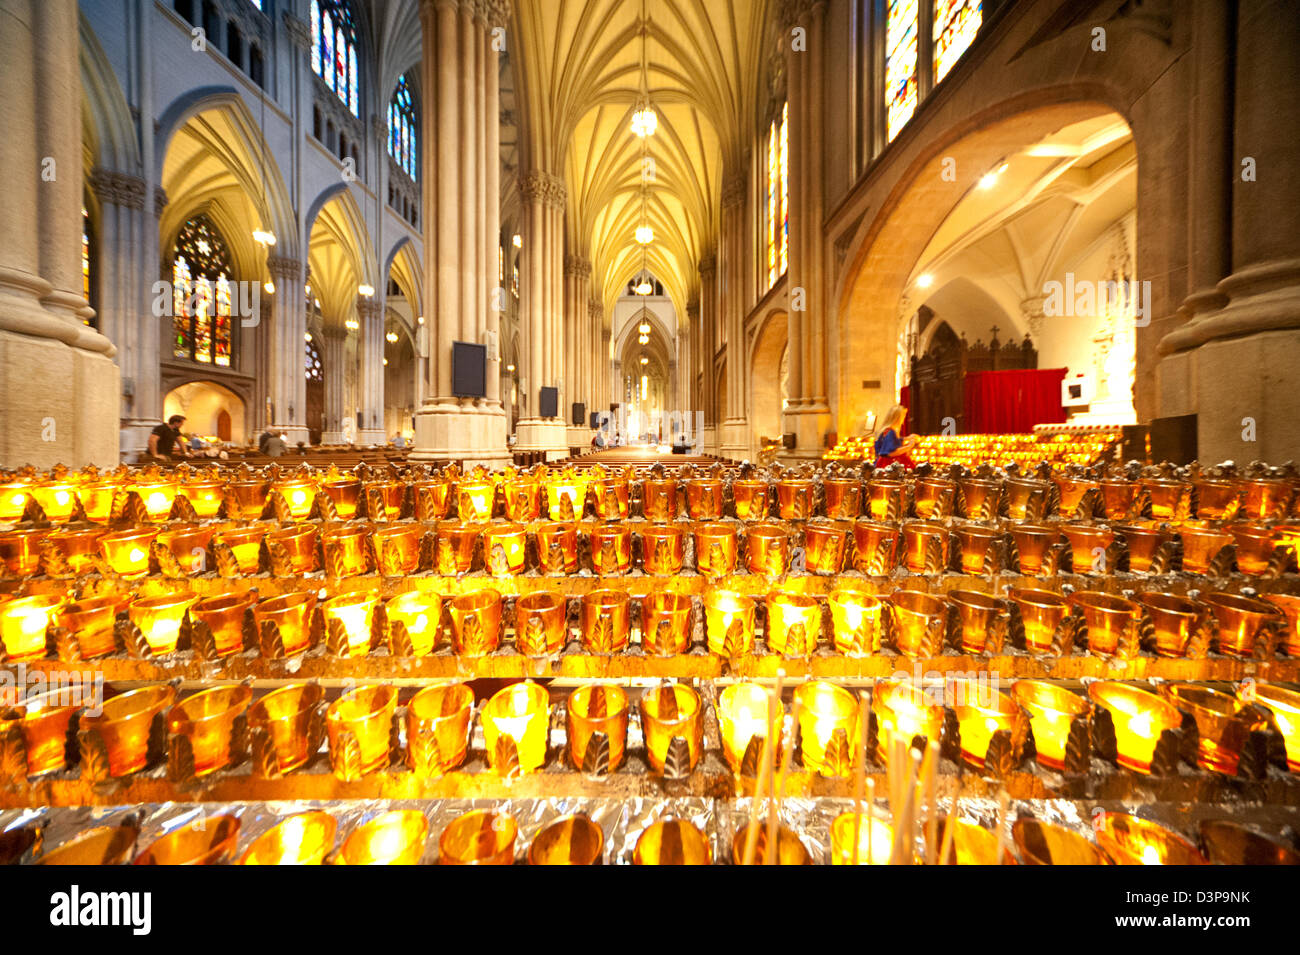 Candles light up the stunning ornate interior of the neo-gothic St Patrick's Cathedral in New York City. Stock Photo